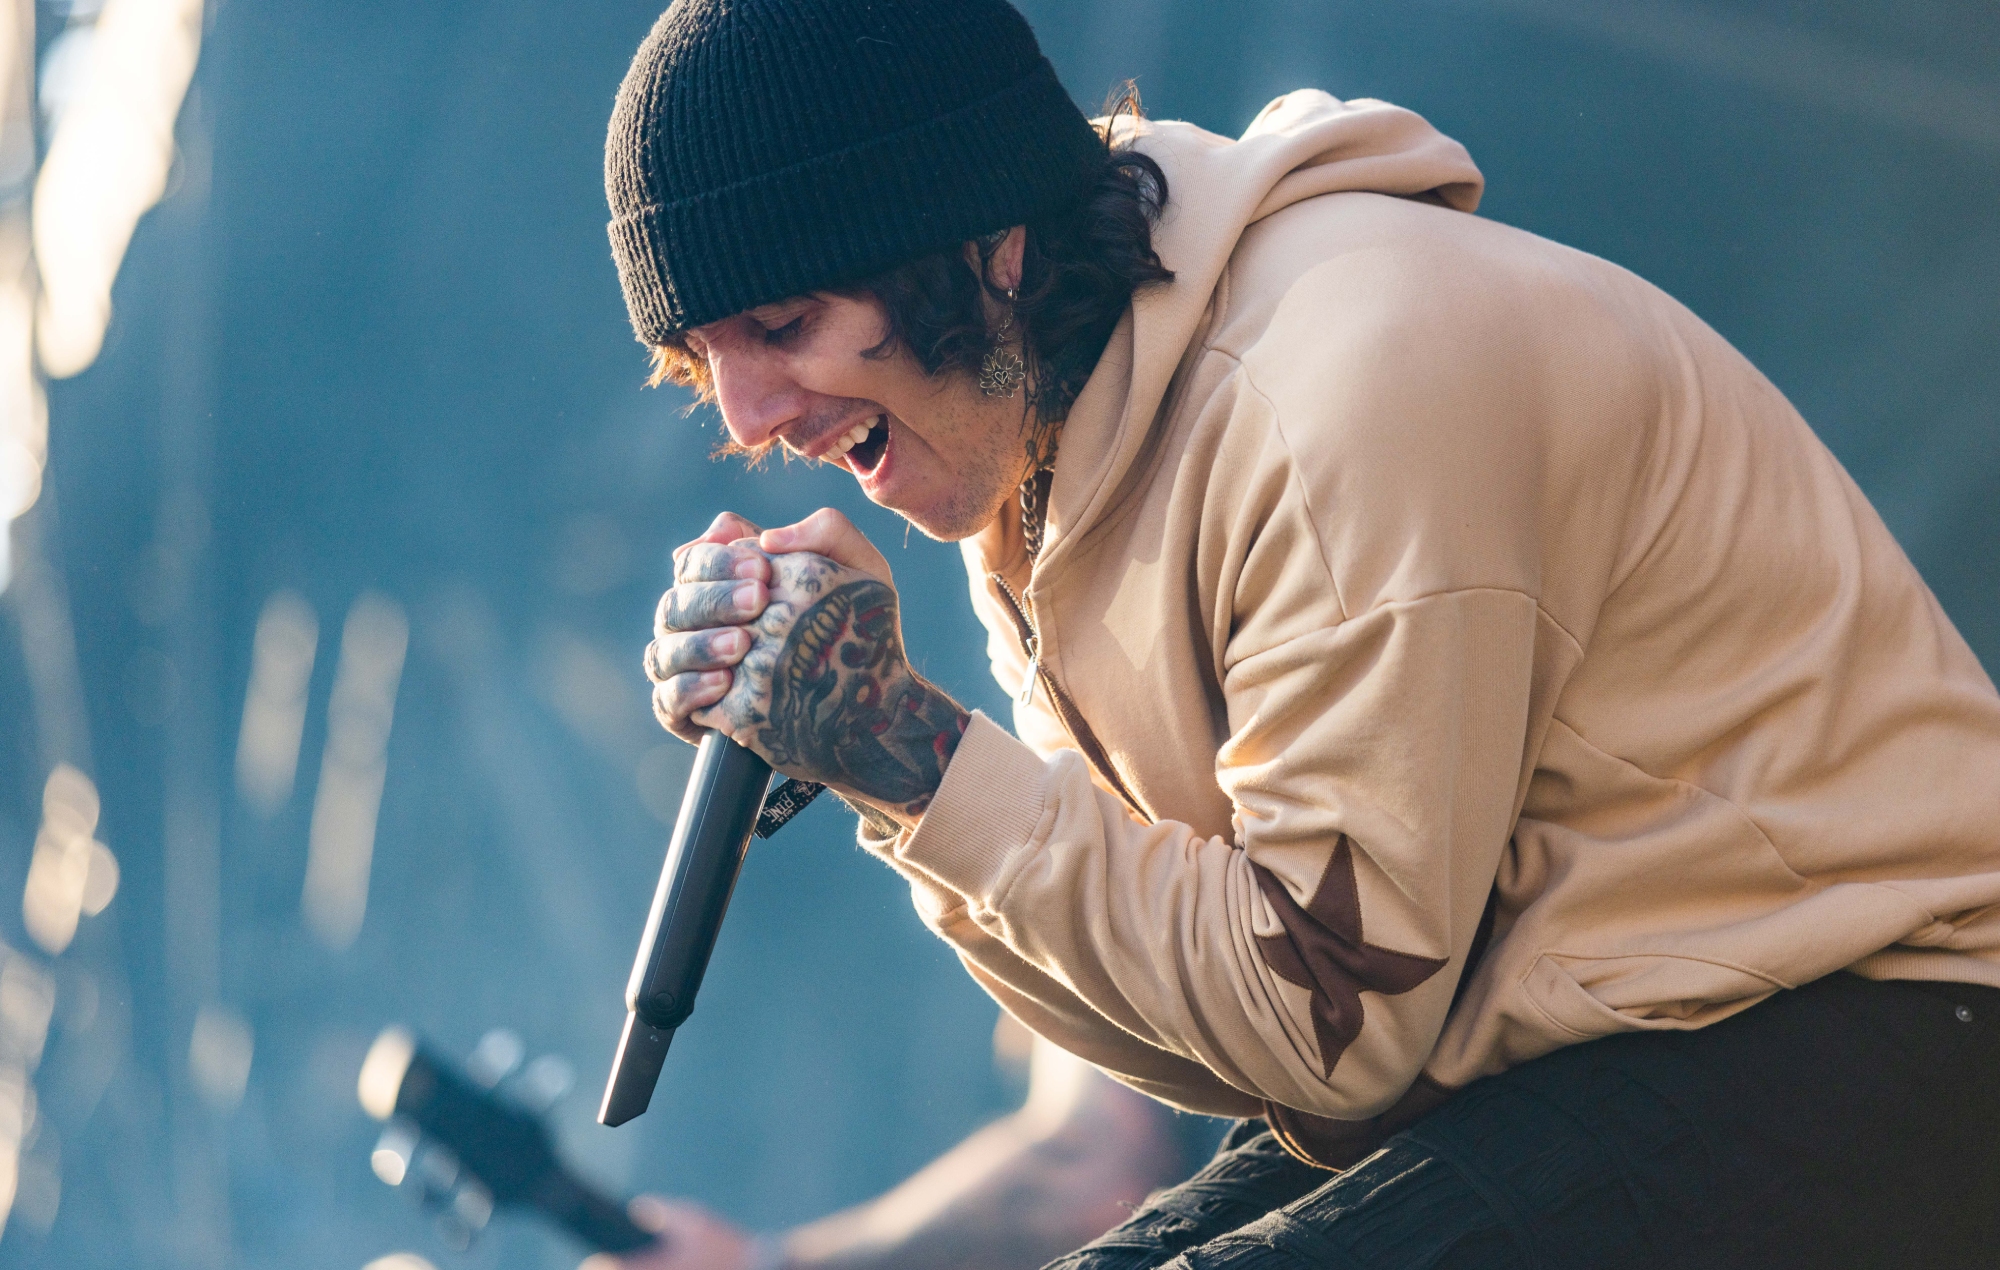 Bring Me The Horizon’s Oli Sykes on what to expect from the next album in the ‘Post Human’ series